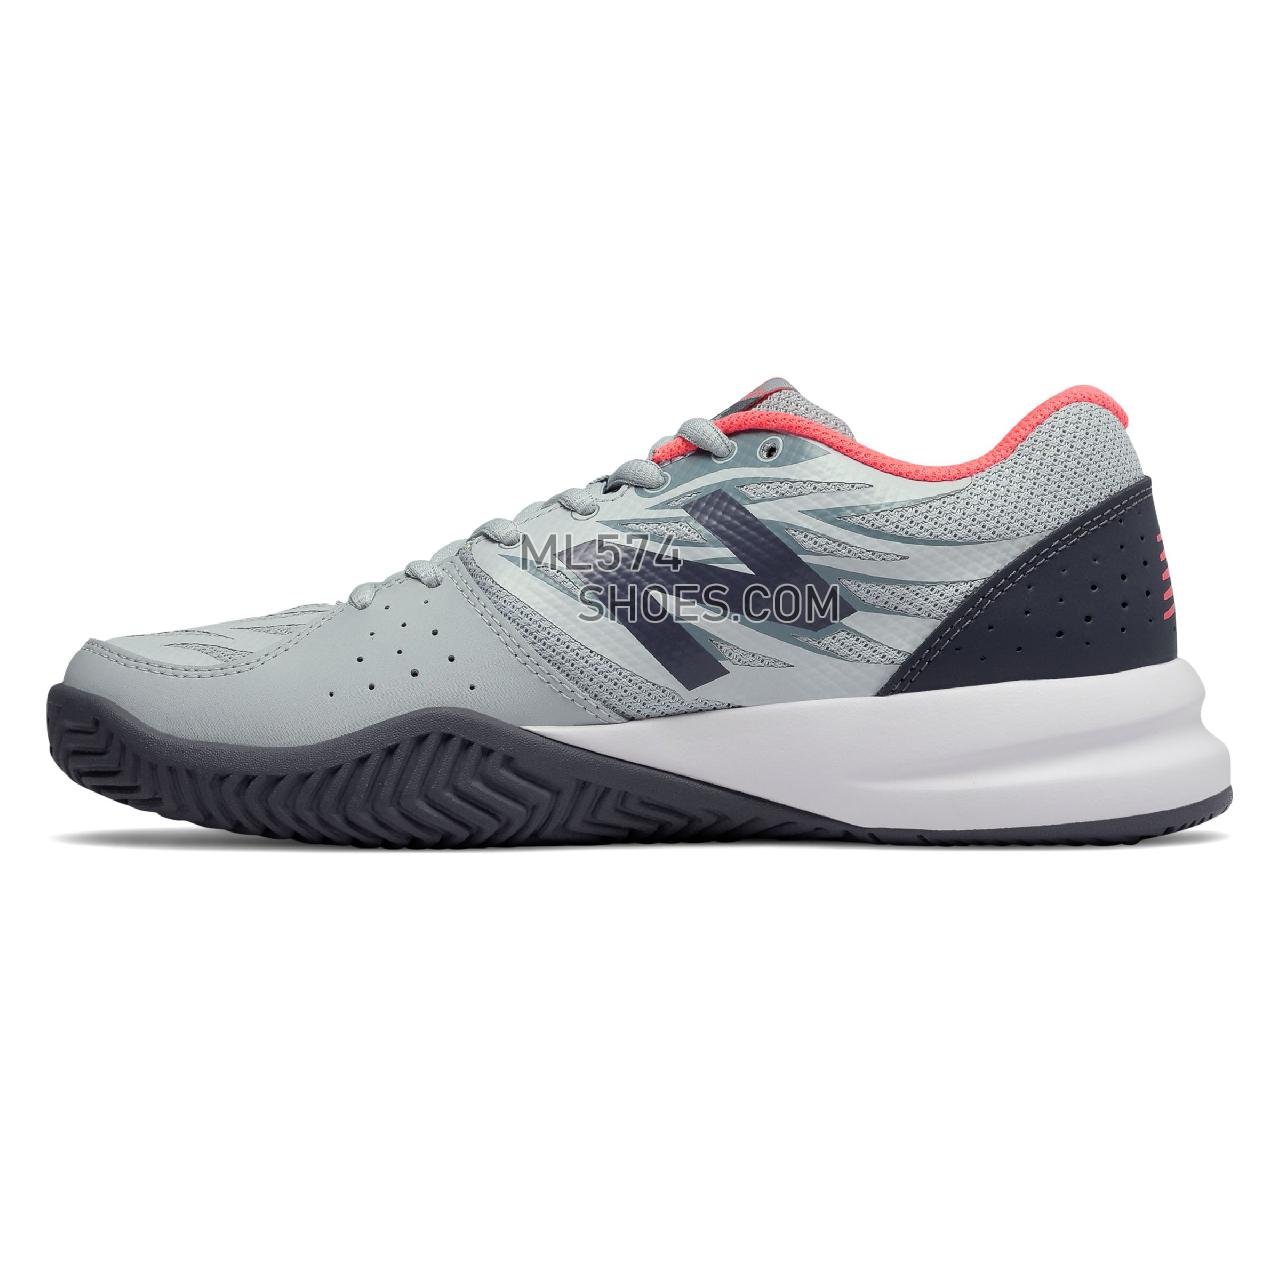 New Balance 786v2 - Women's 786 - Tennis / Court Light Cyclone with Dragonfly - WCH786L2